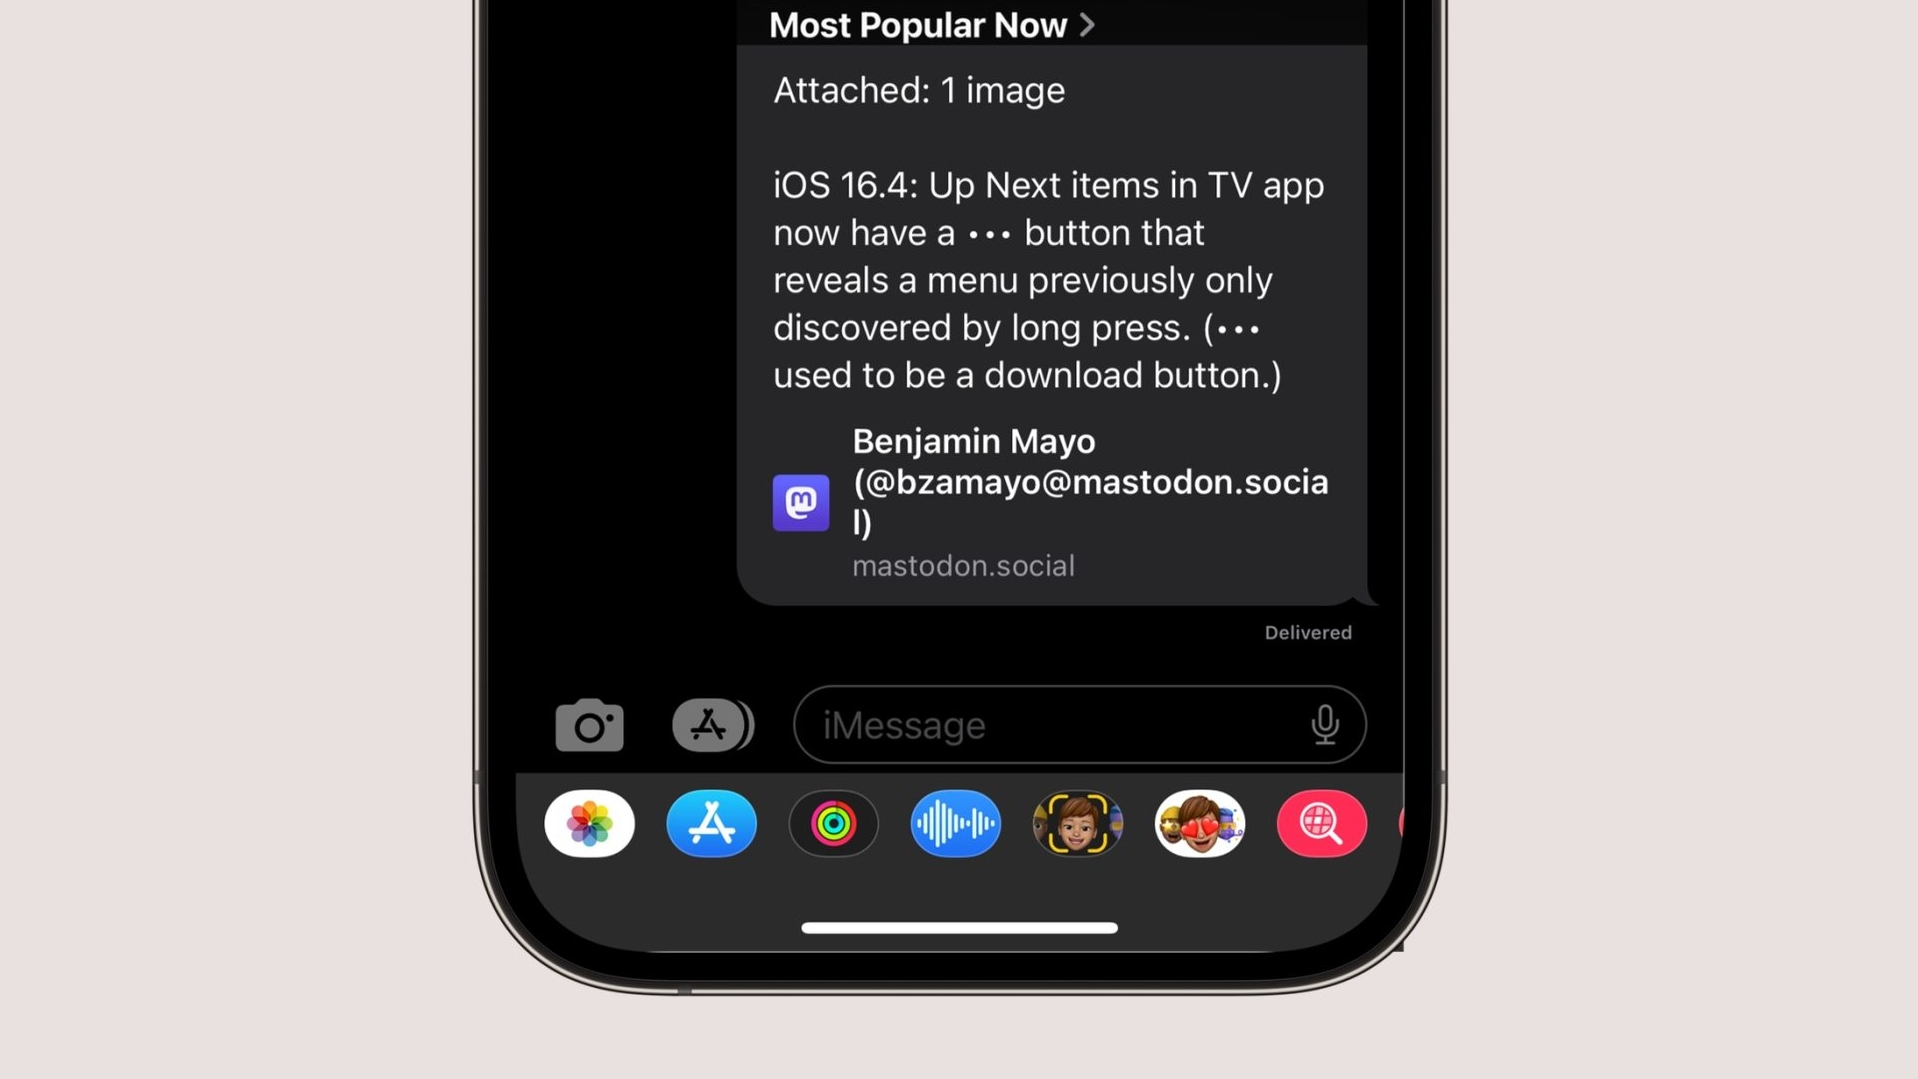 iOS 16.4 enables rich embeds for Mastodon links sent via iMessage